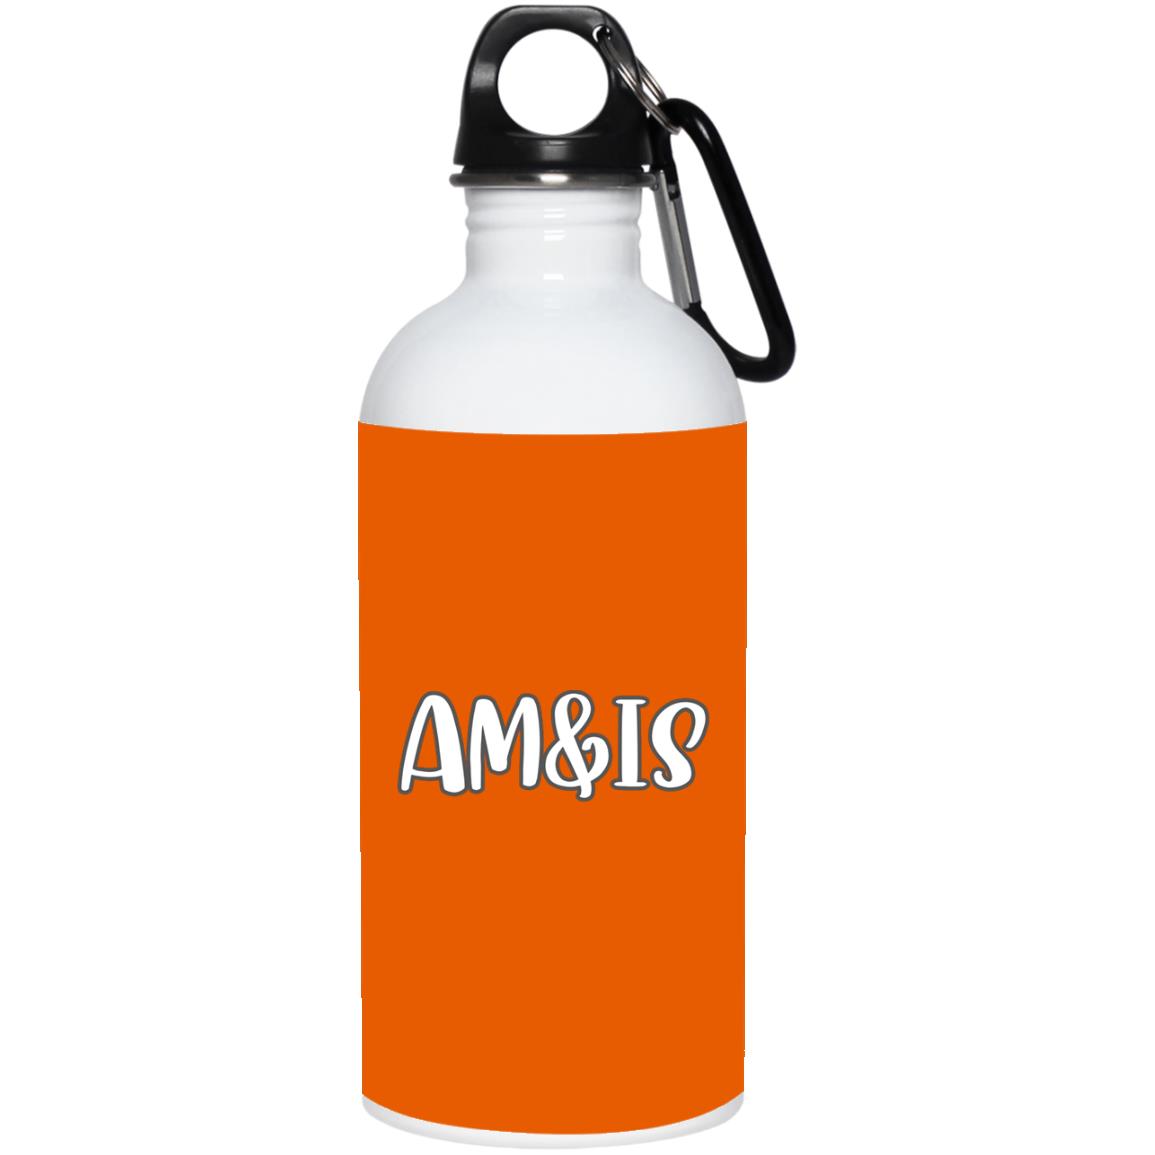 BURNT ORANGE ONE SIZE - AM&IS Activewear 20 oz. Stainless Steel Water Bottle - Drinkware at TFC&H Co.